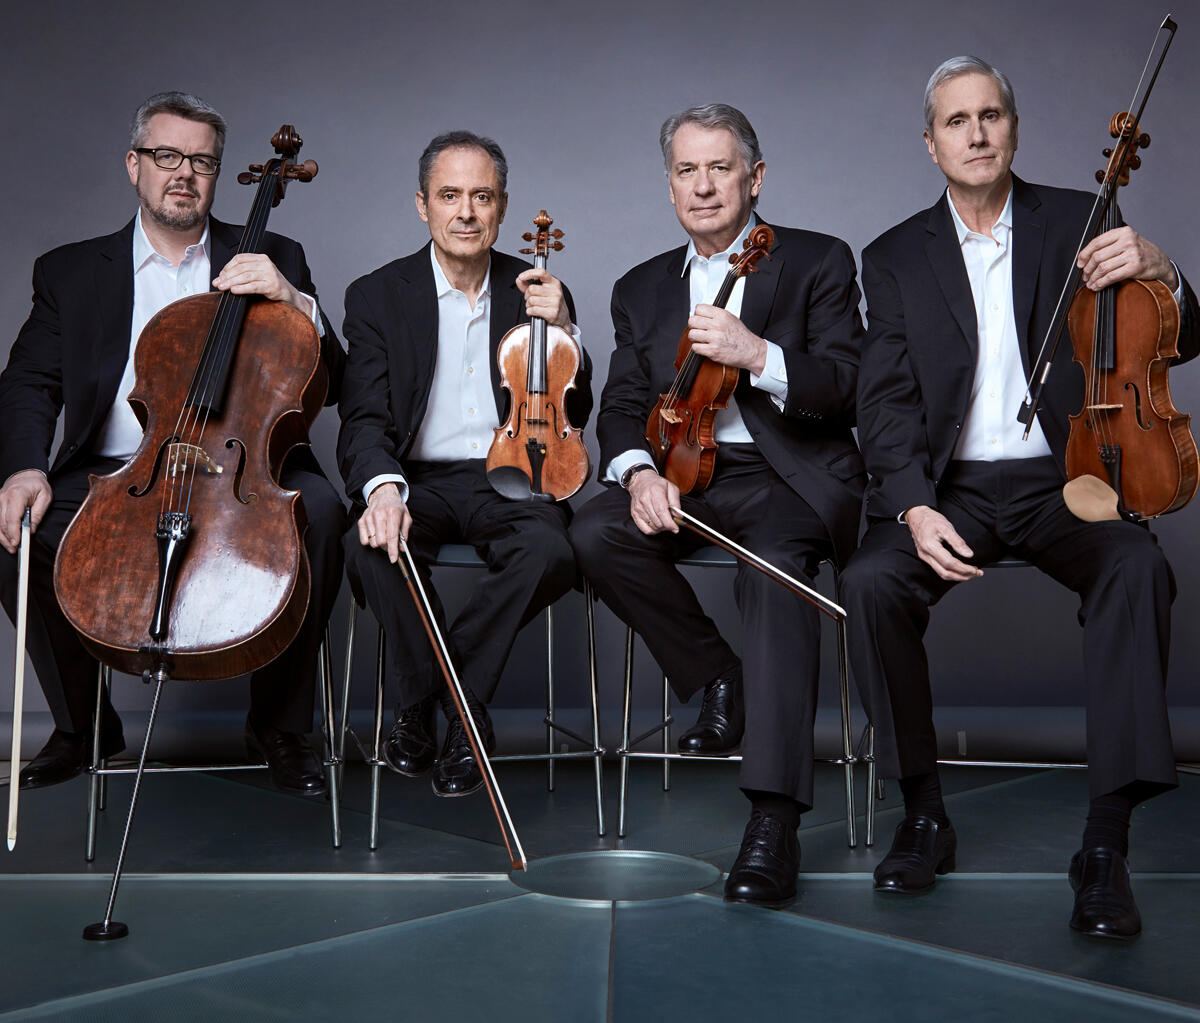 Hoch Chamber Music Series presents the Emerson String Quartet Final Bow